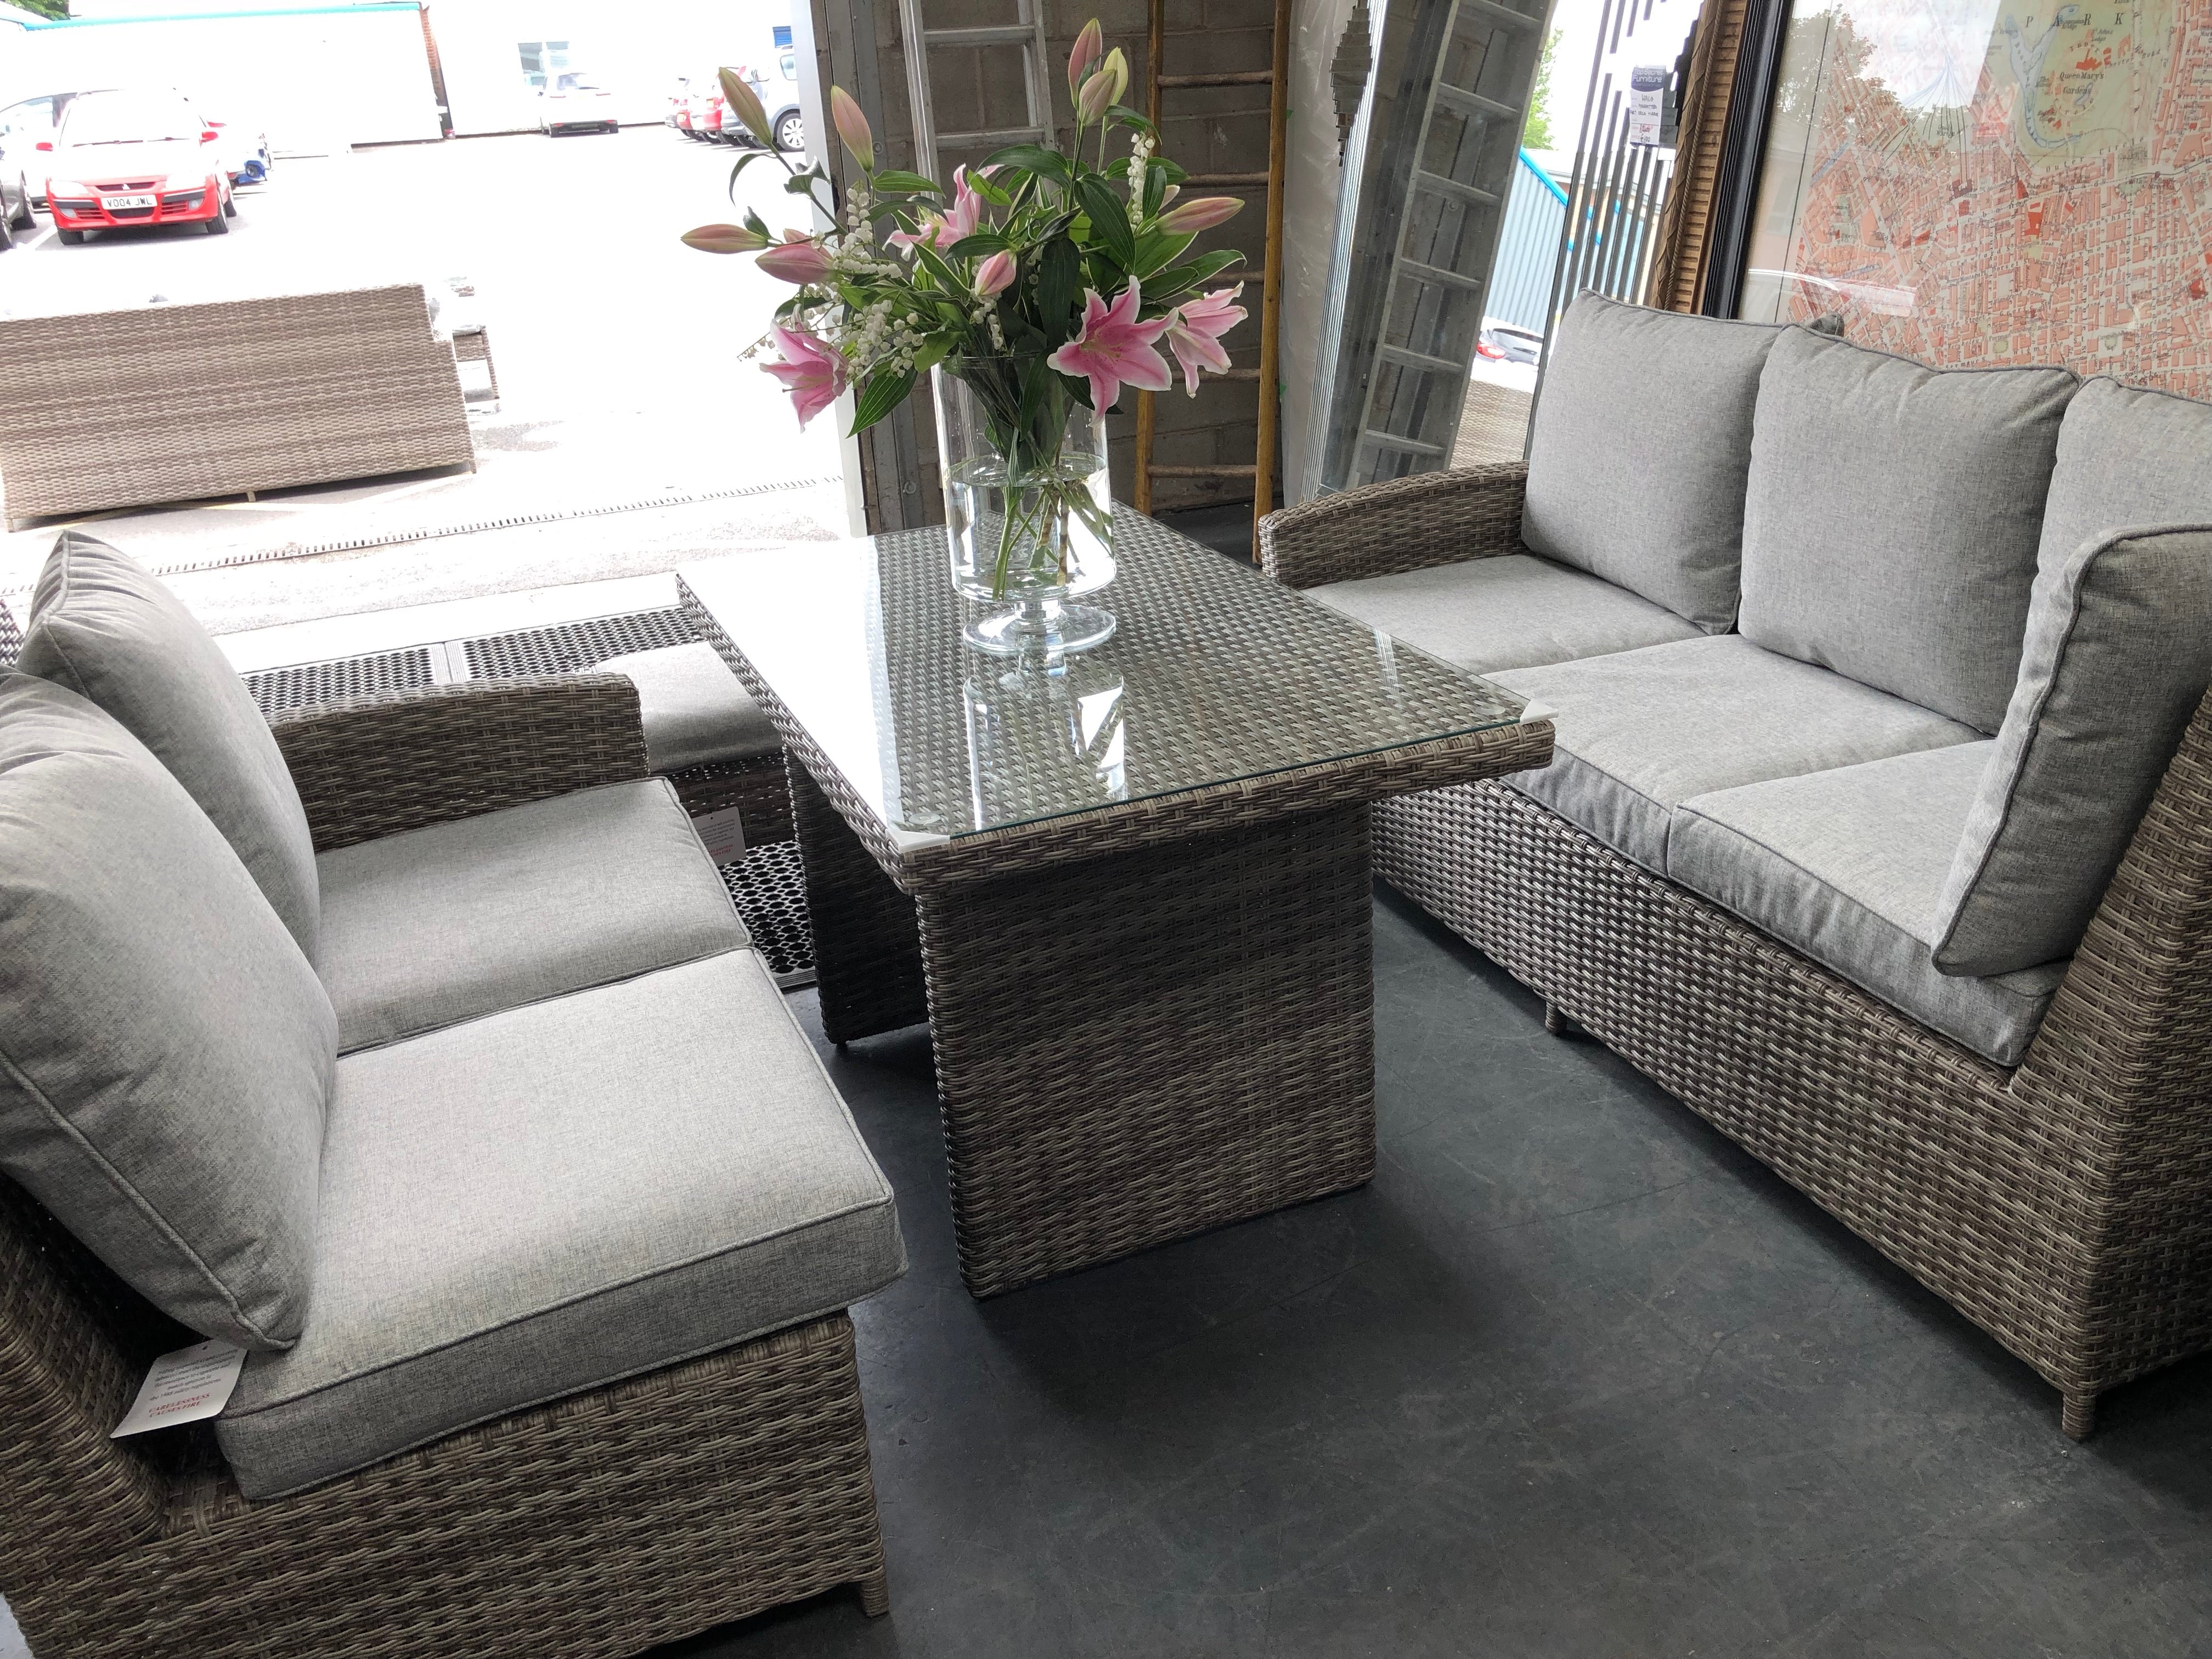 Rattan garden furniture from Top Secret Furniture outlet Cheshire